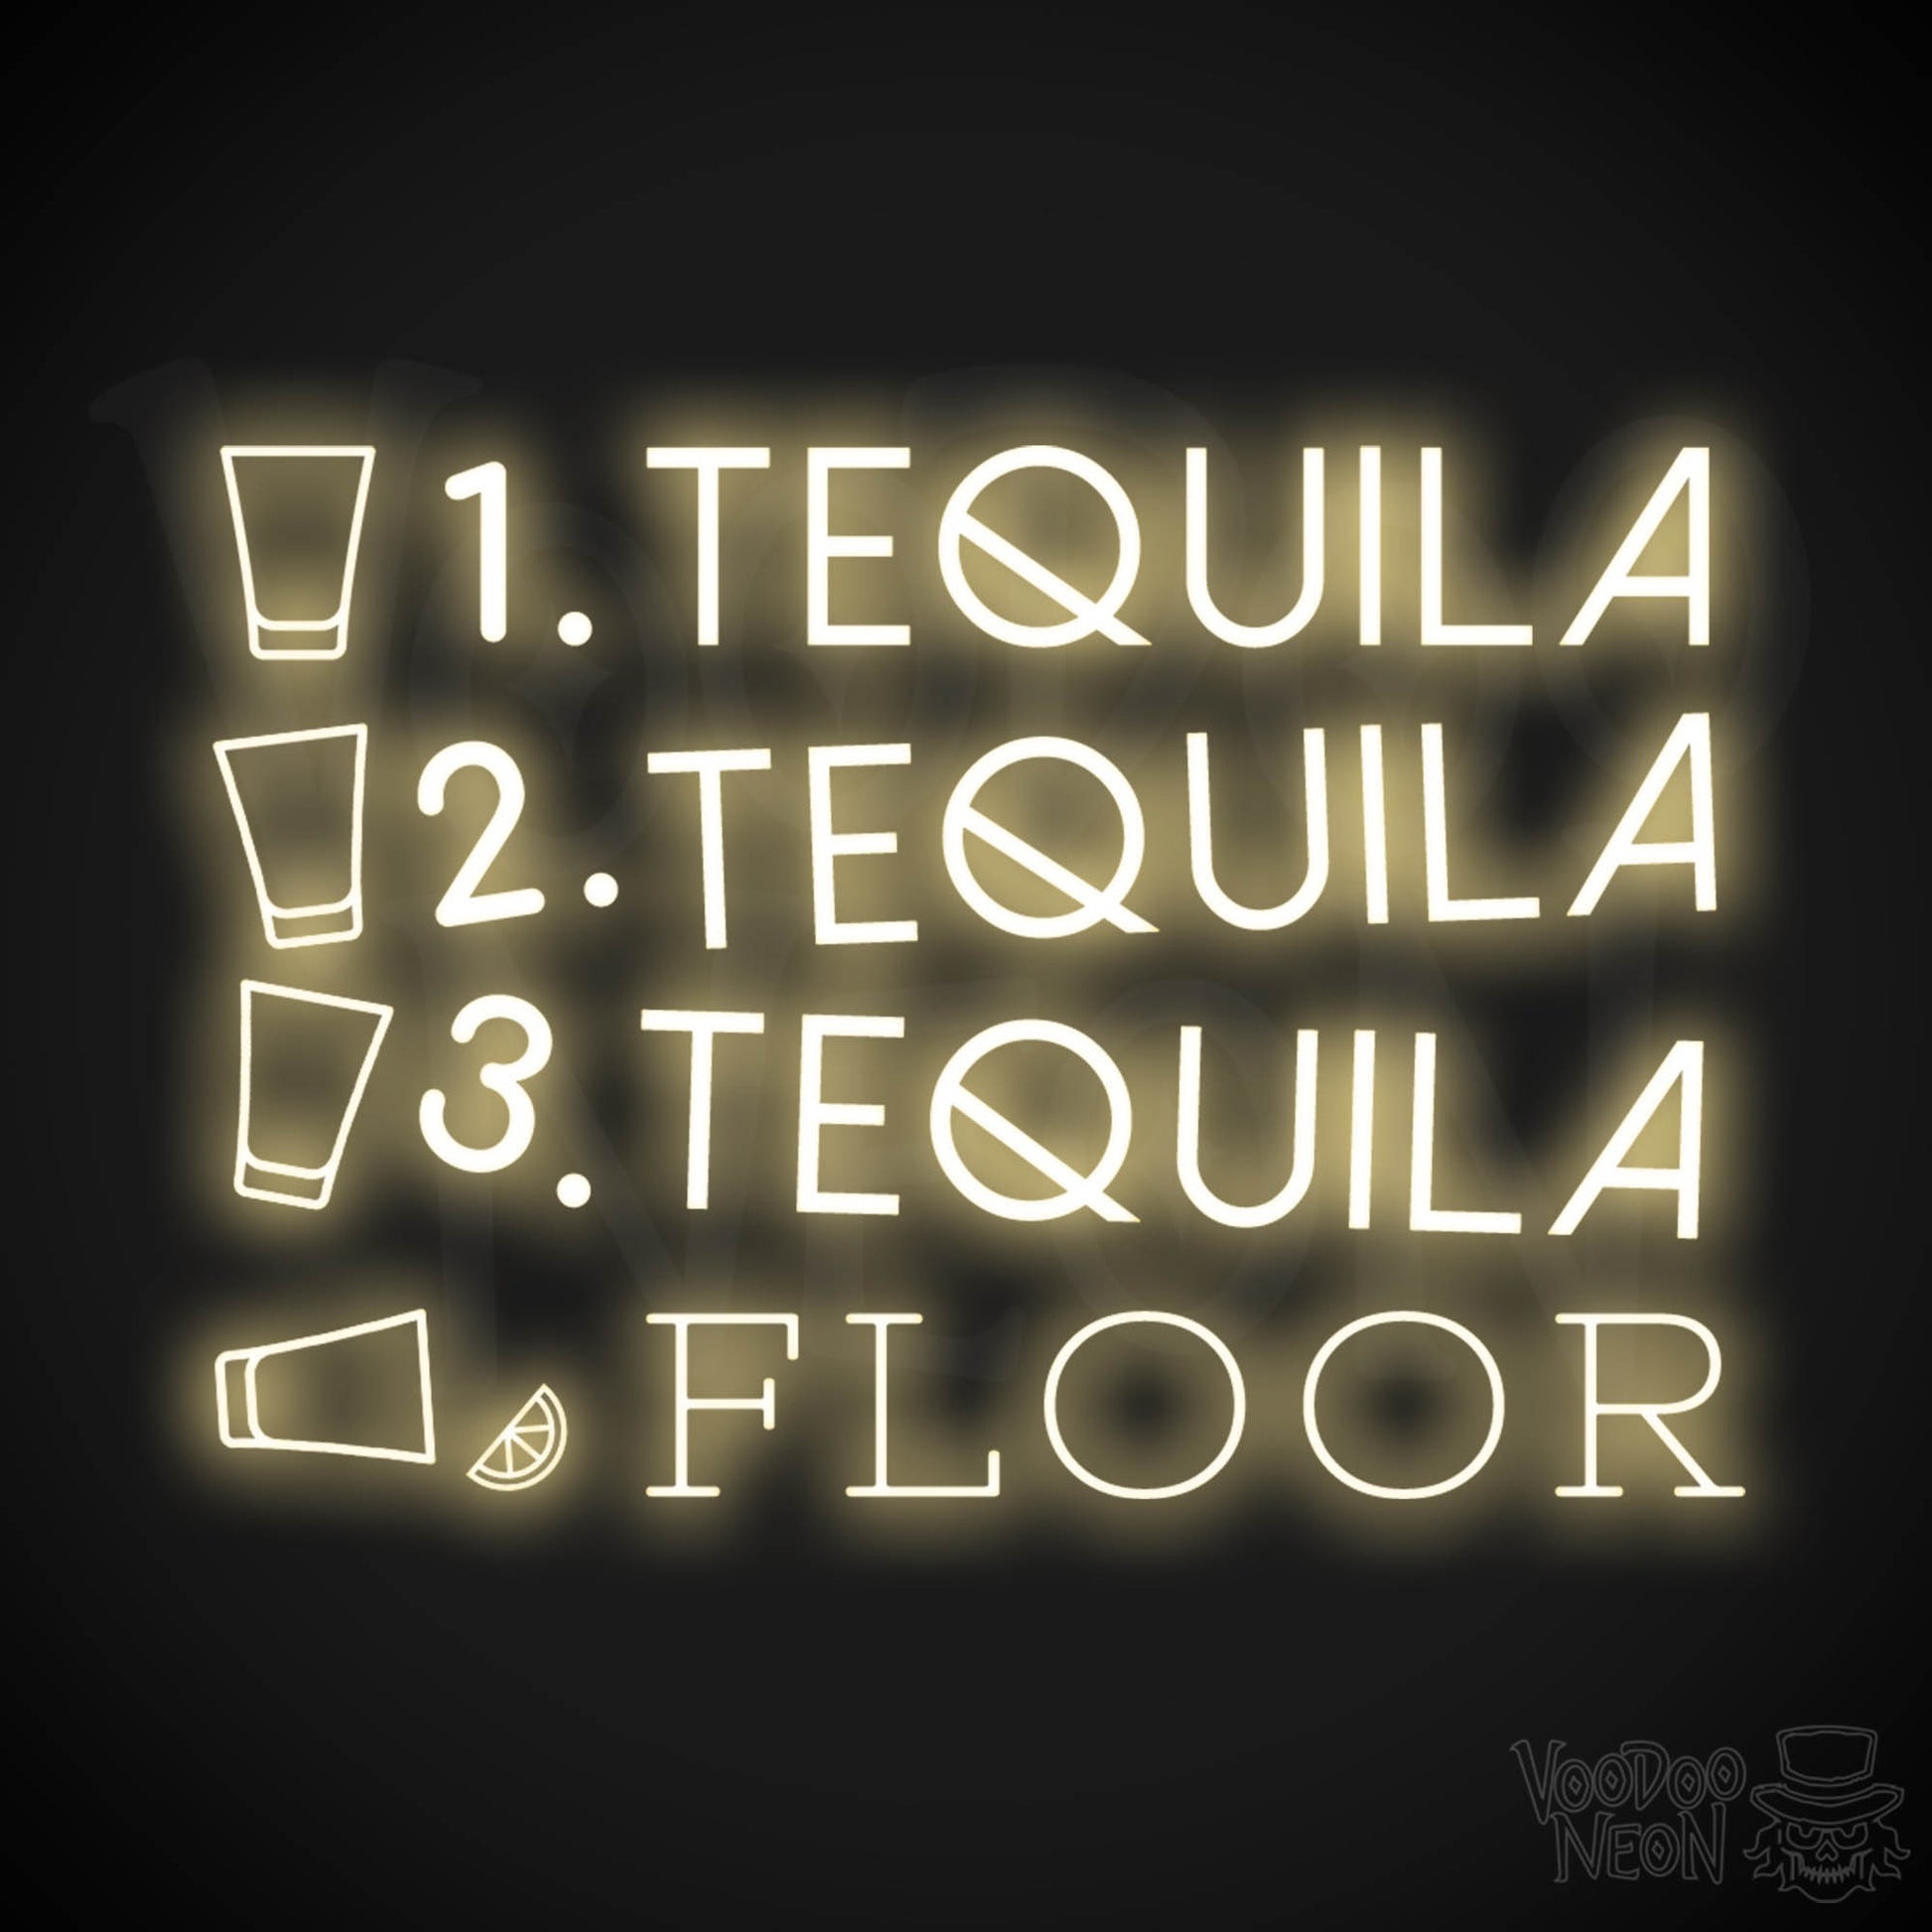 One Tequila Two Tequila Three Tequila Floor Neon sign - Neon Wall Art - Color Warm White